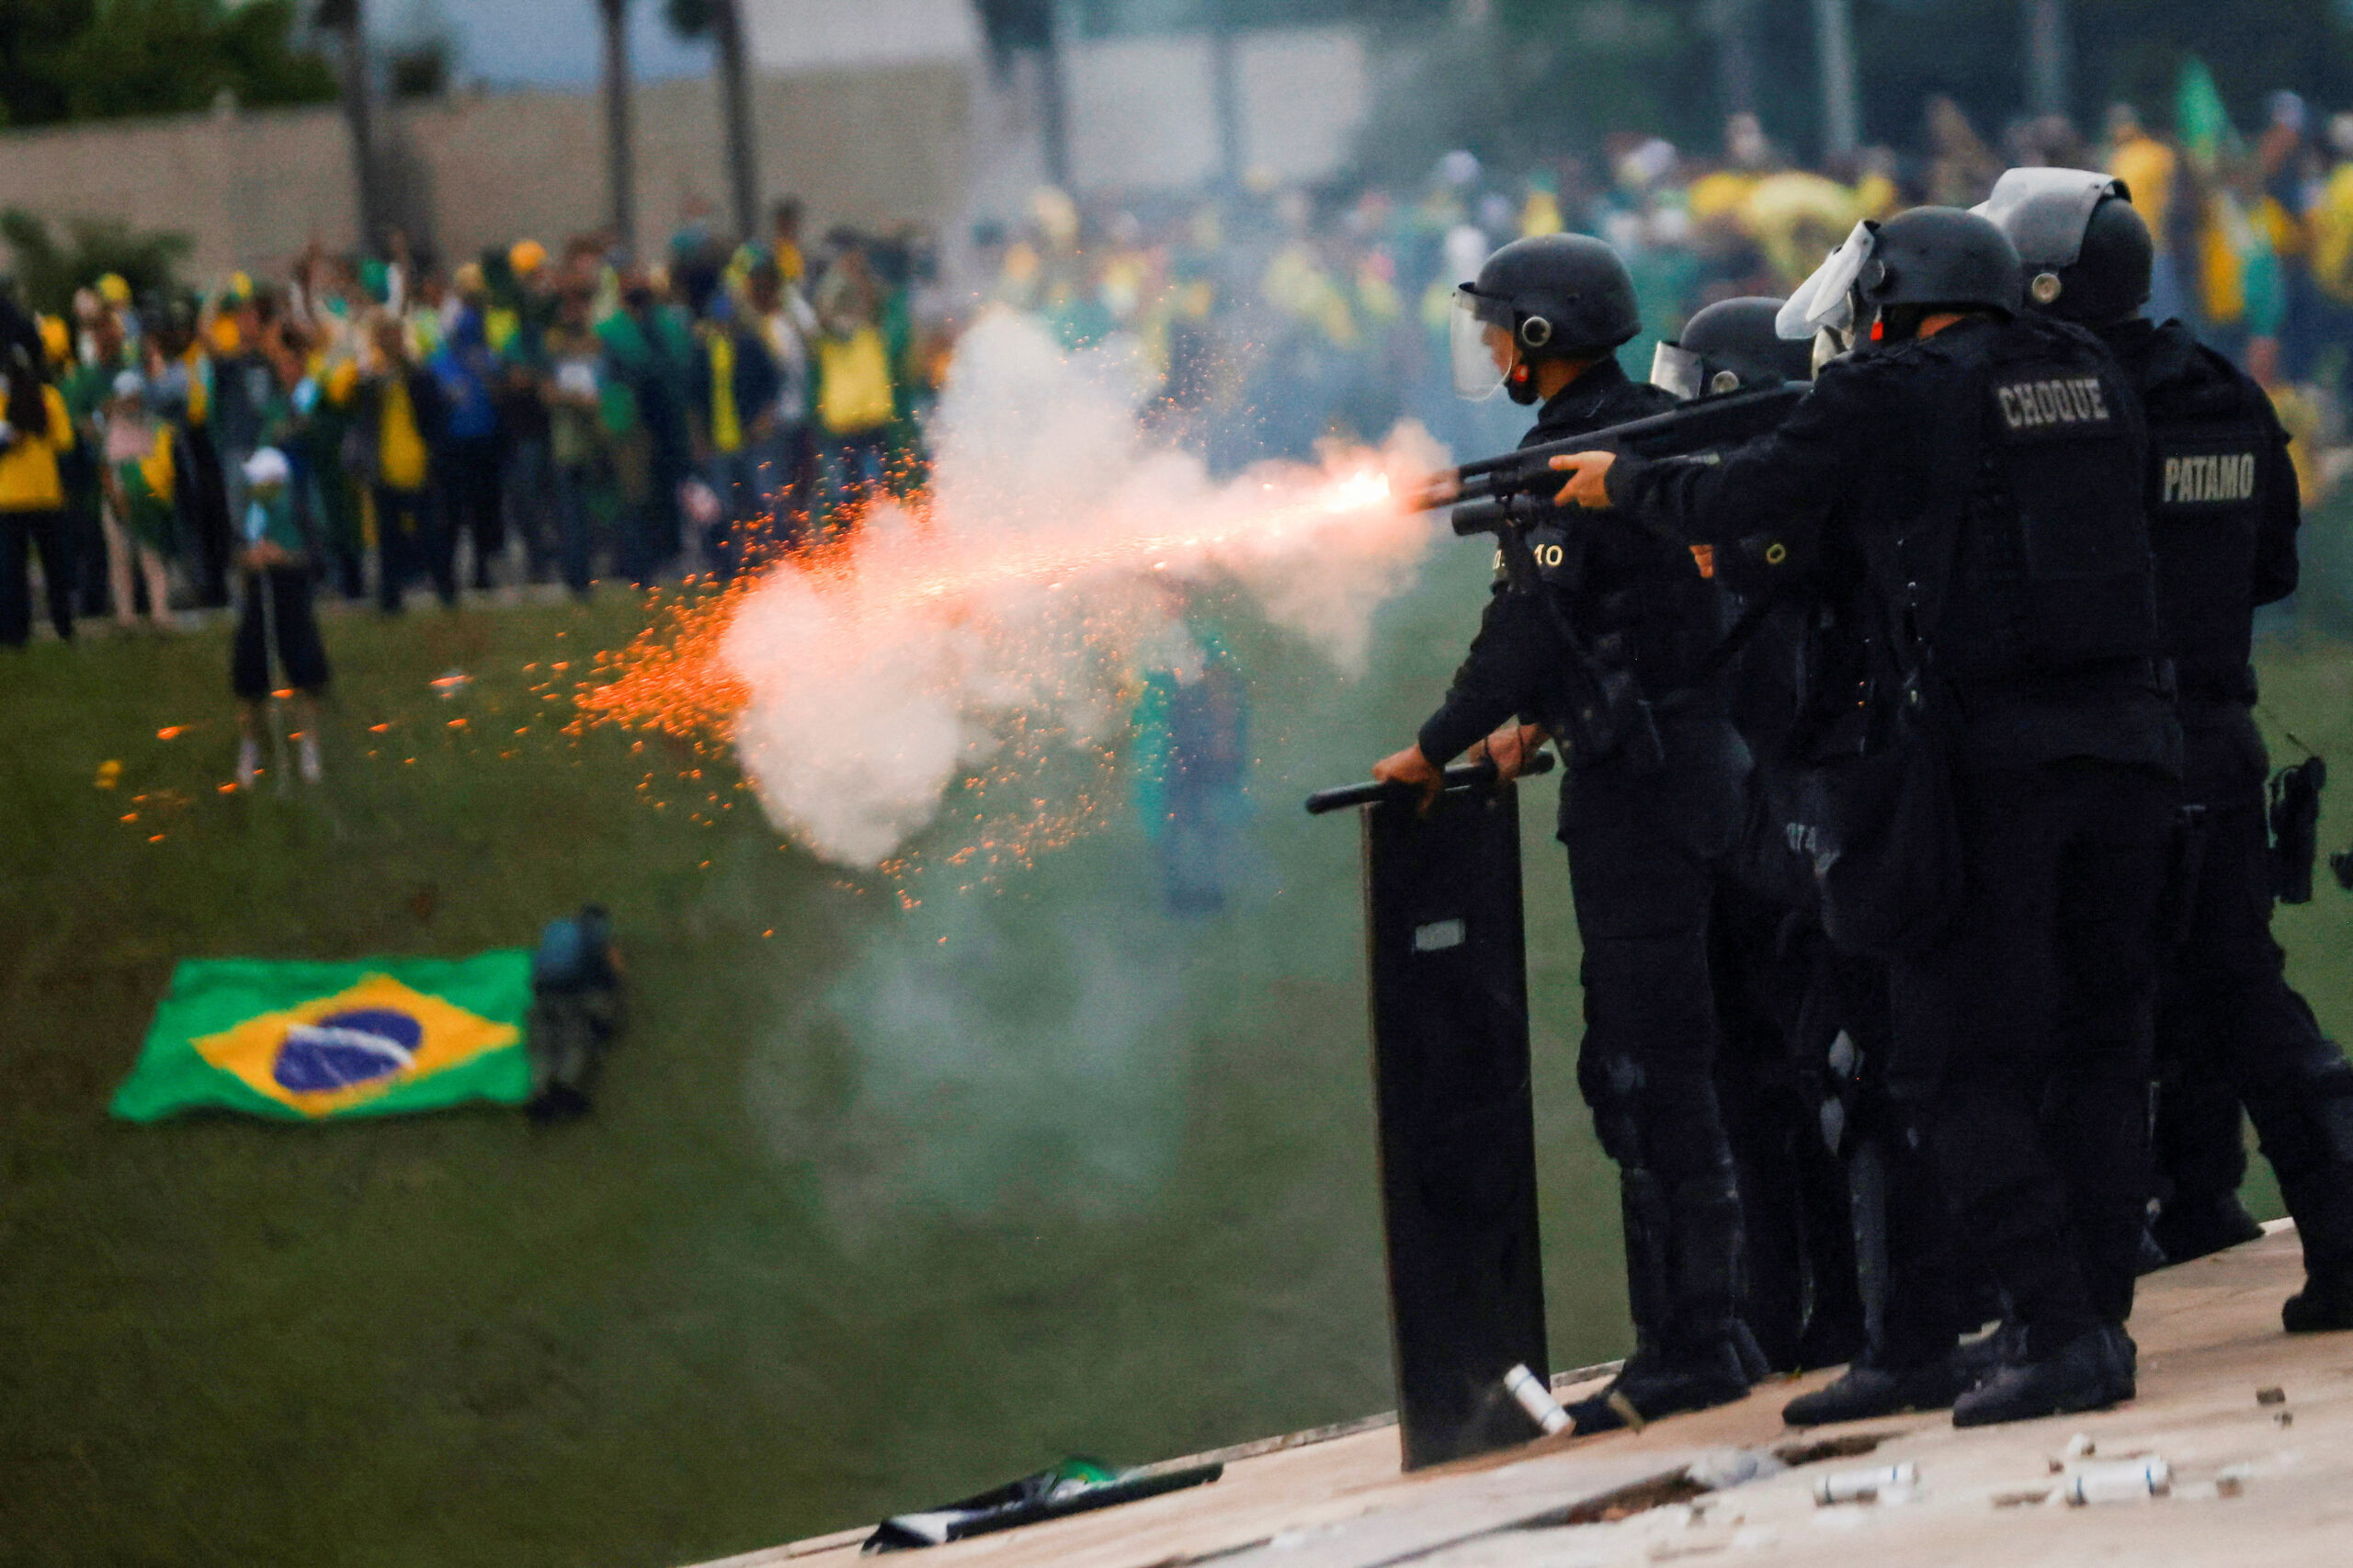 Brazil in shock after Bolsonaro supporters storm Congress, Supreme Court and Presidential Palace